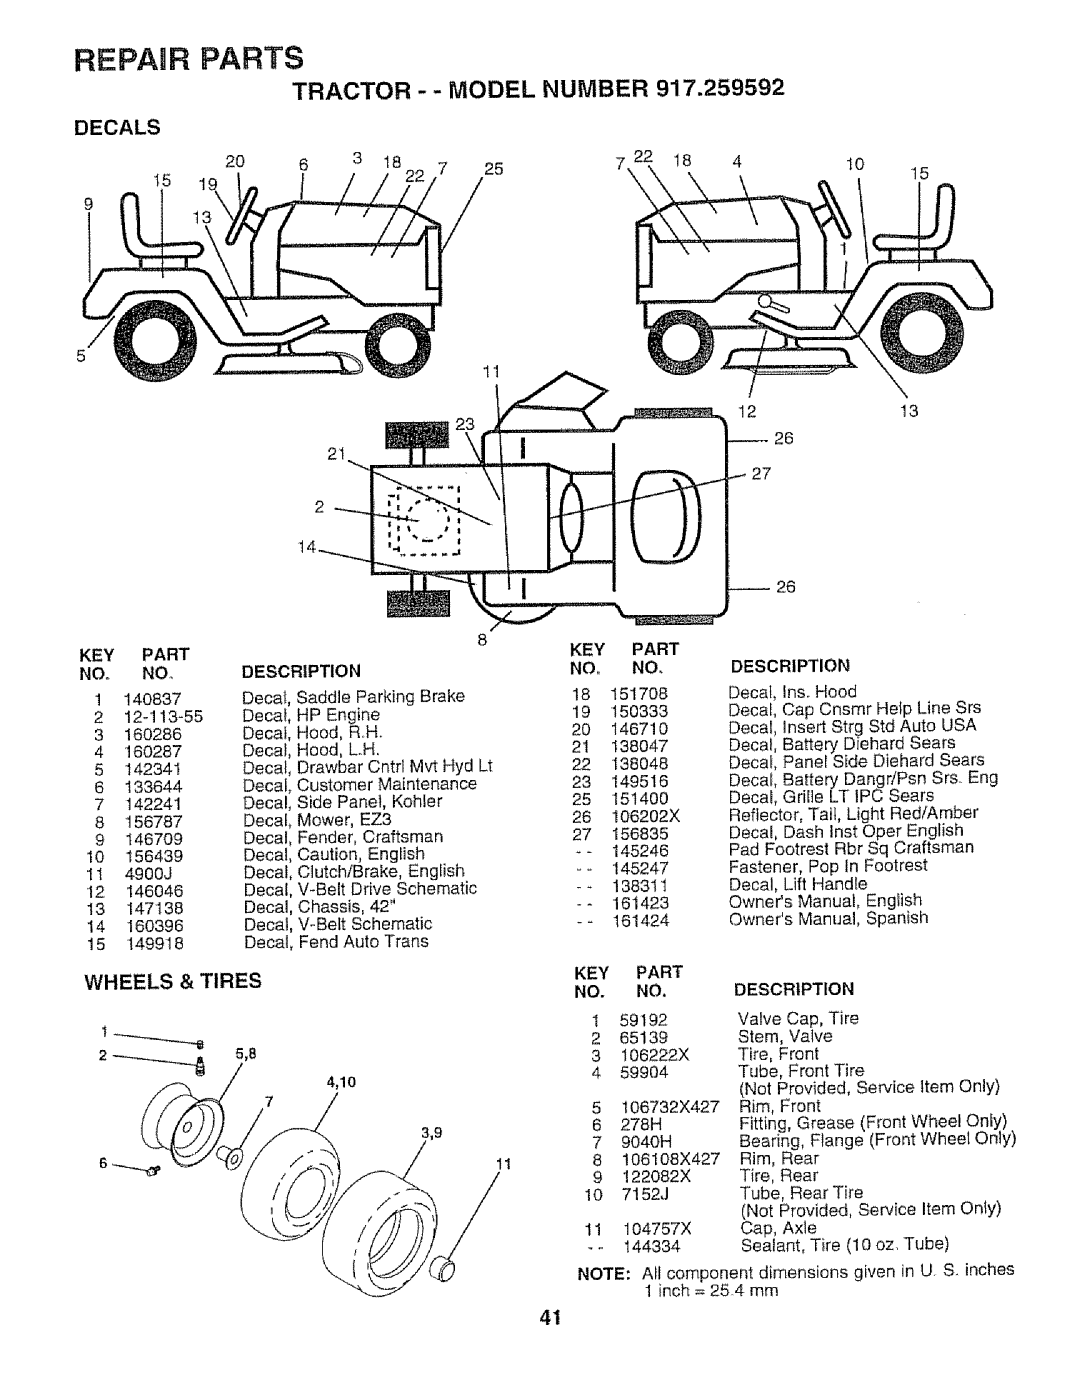 Craftsman 917.259592 owner manual REPAnR PARTS, Decals, Wheels & Tires, Tractor - - Model Number 